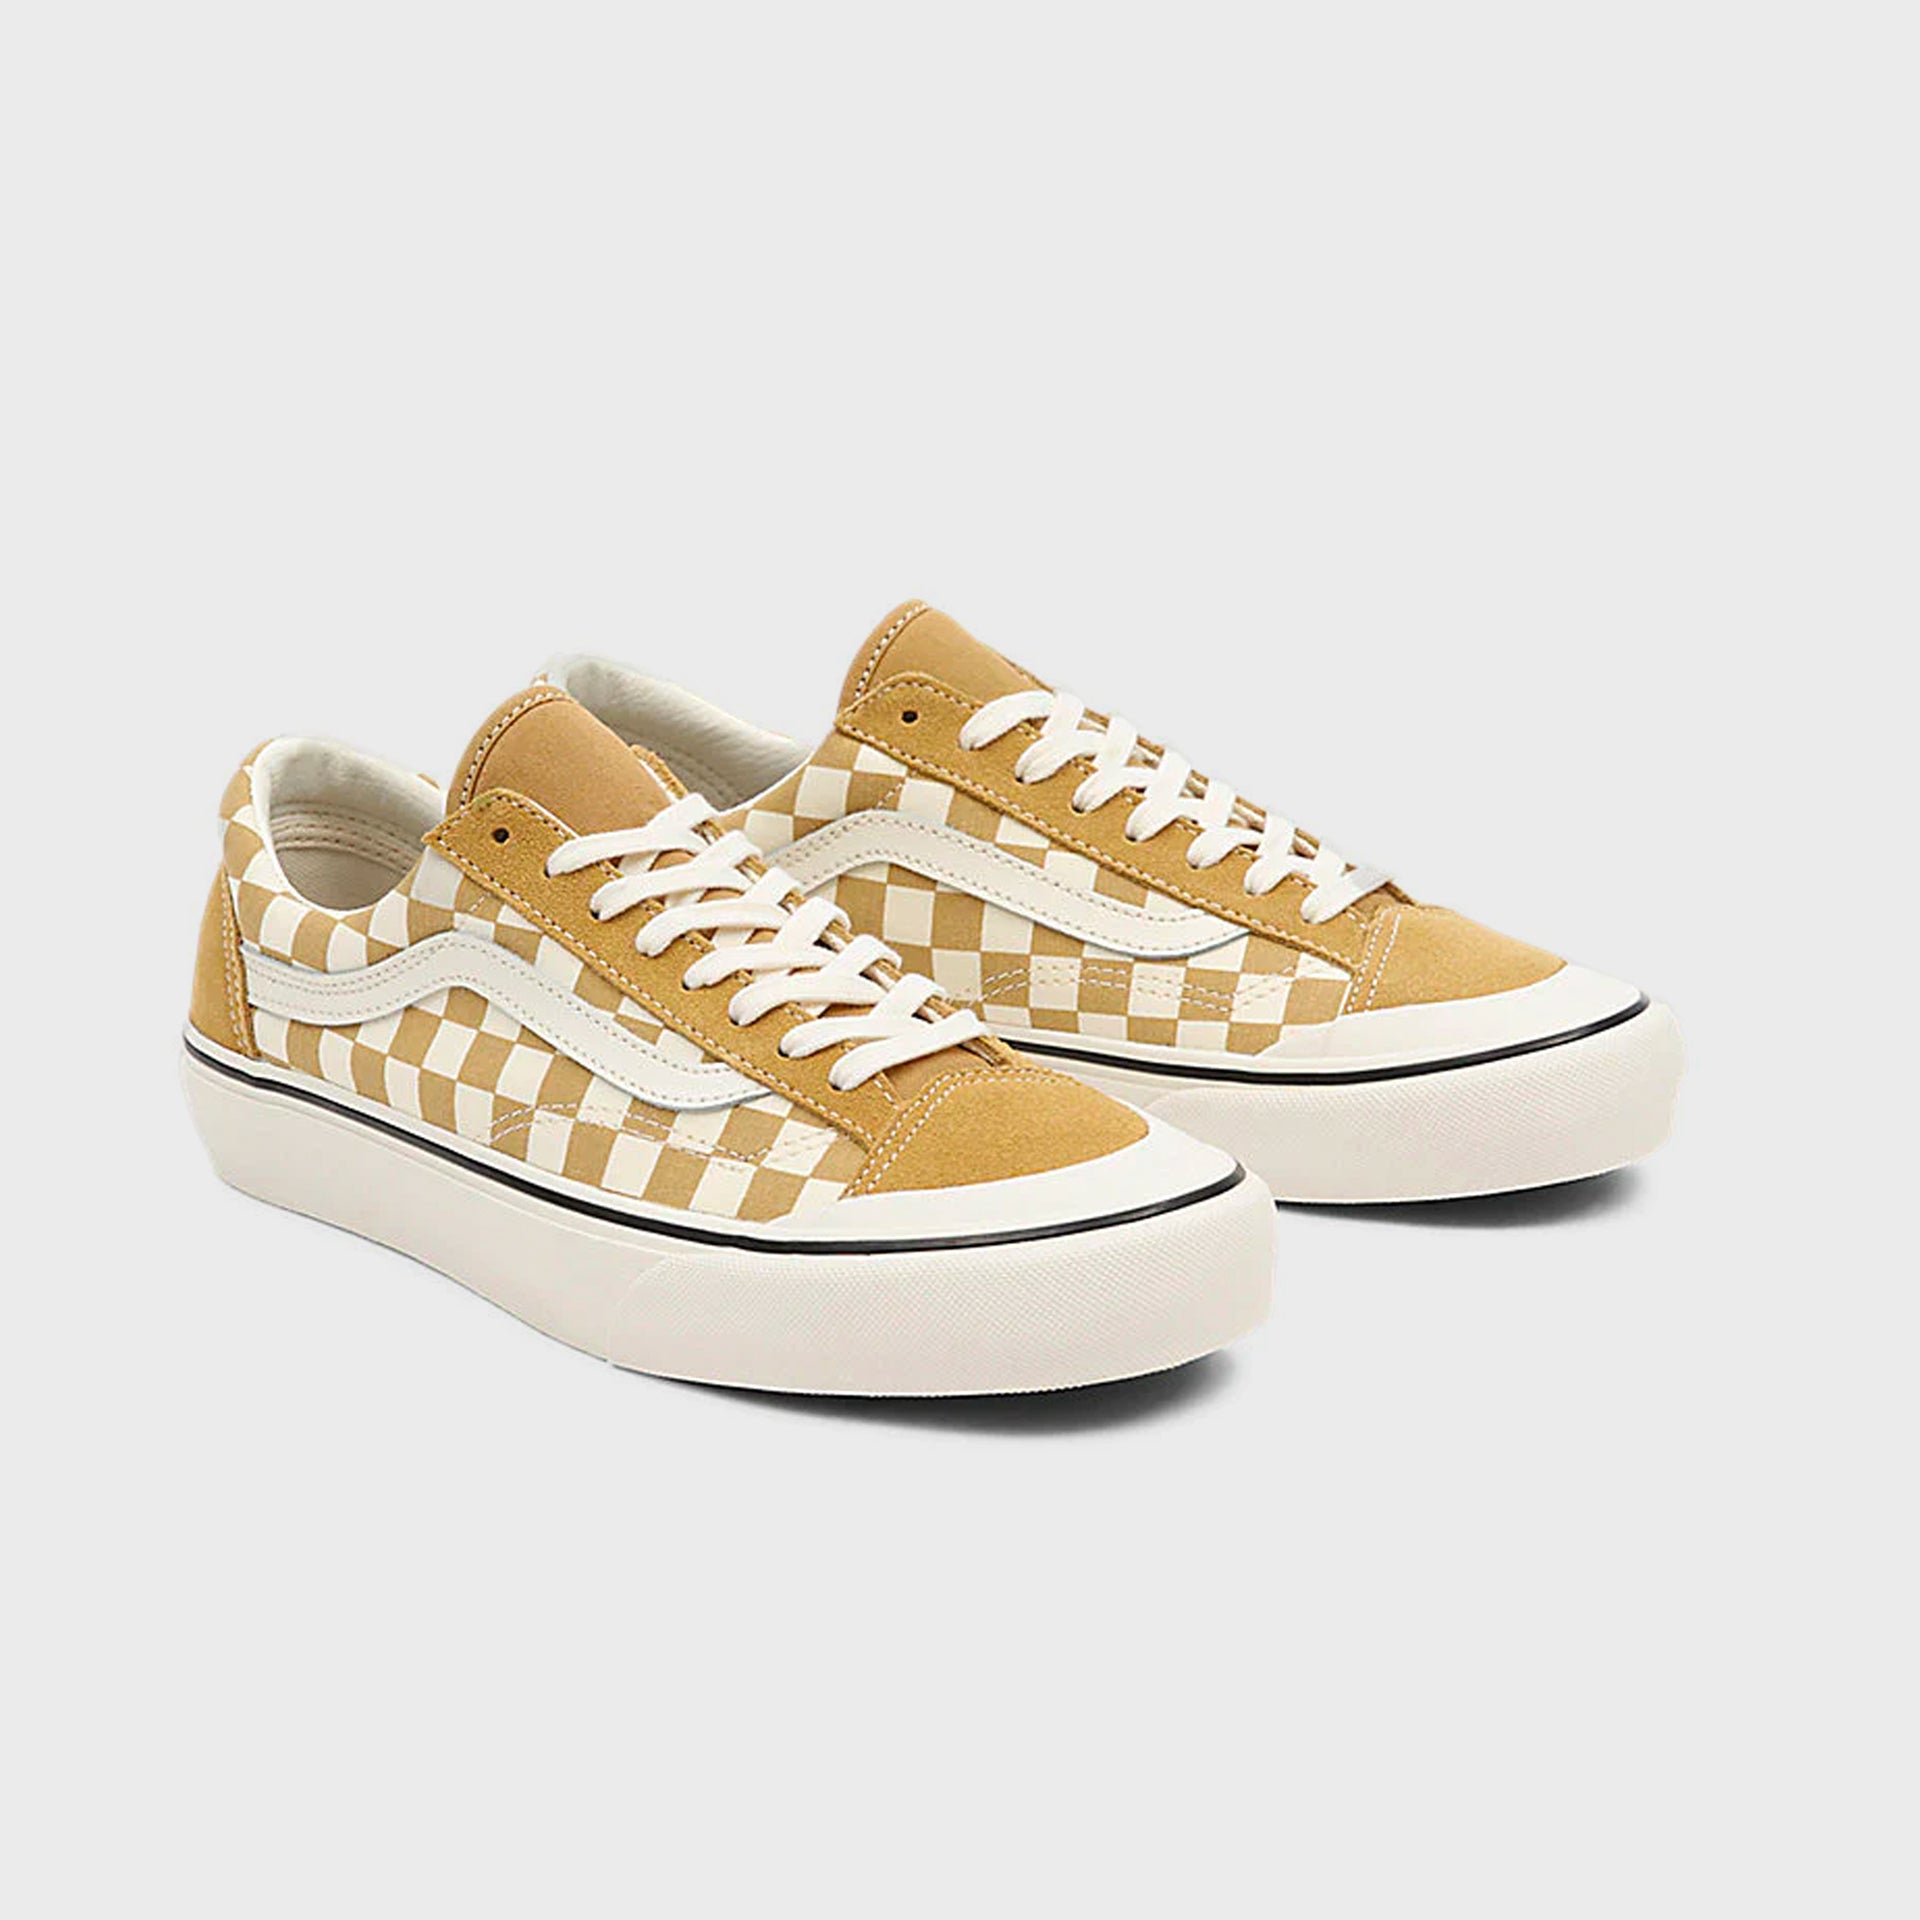 Vans UA Style 36 SF Checkerboard Shoes - Mustard Gold/Marshmallow - ManGo Surfing